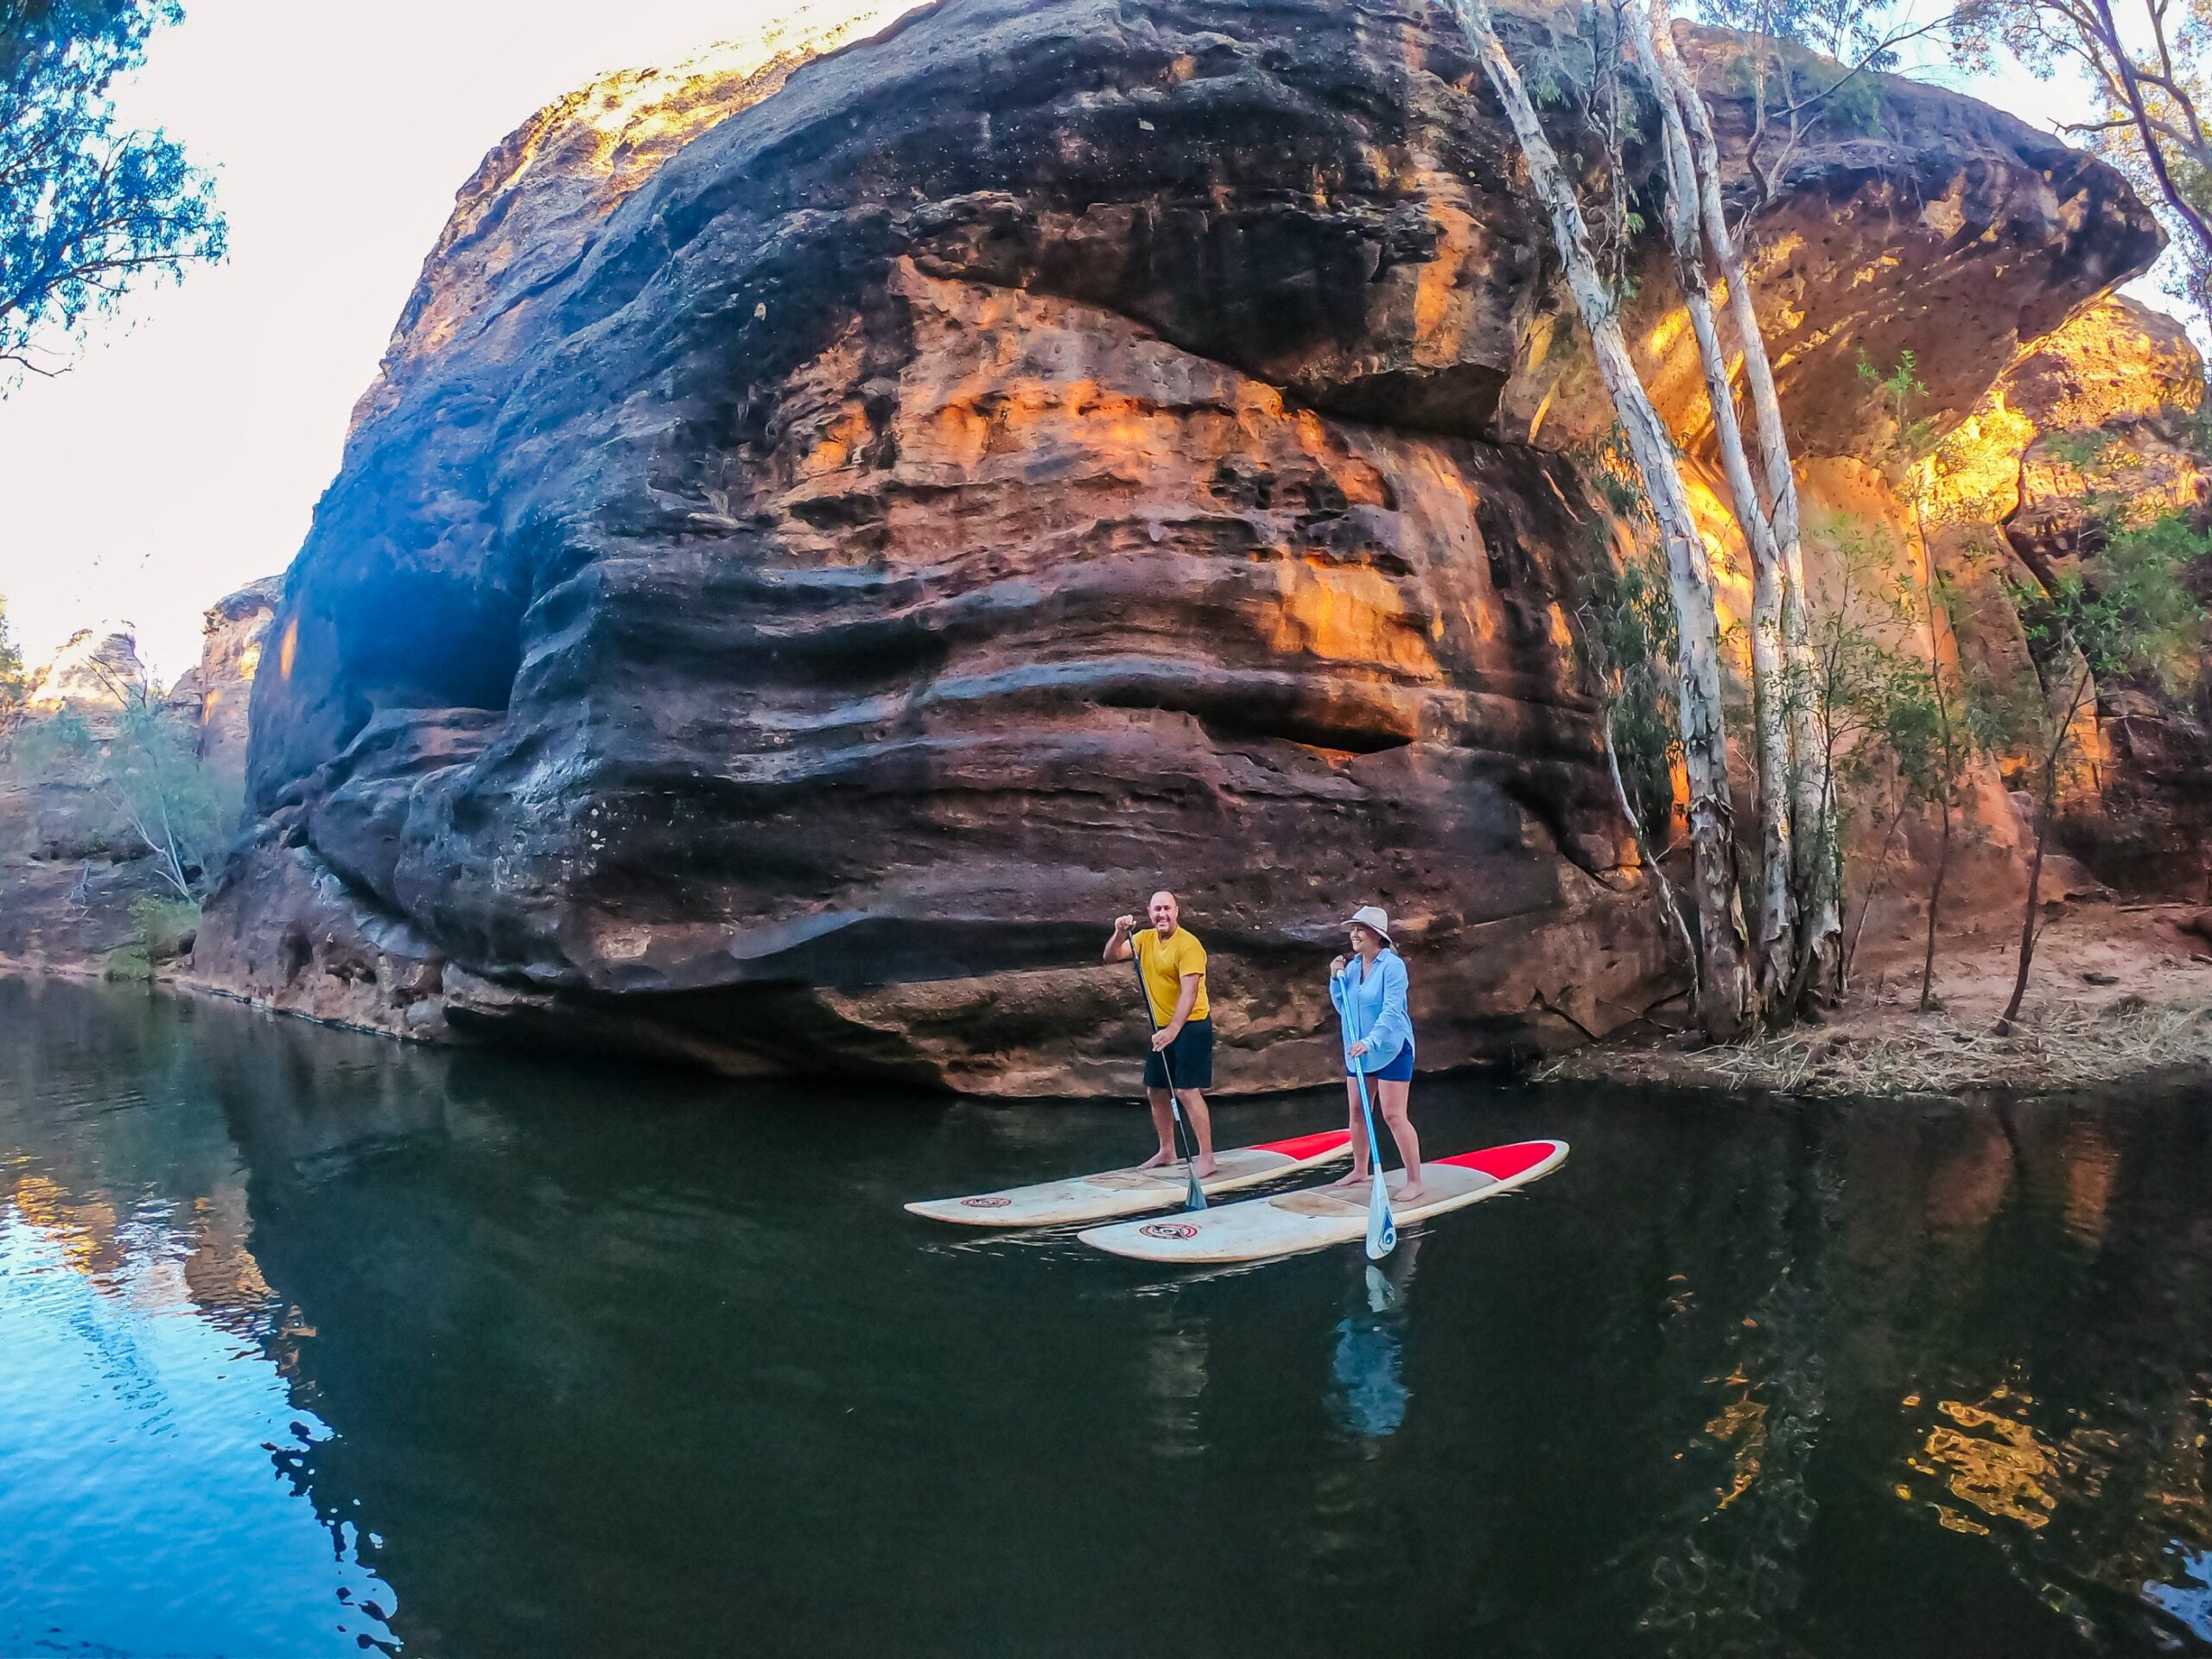 Paddleboarders in gorge